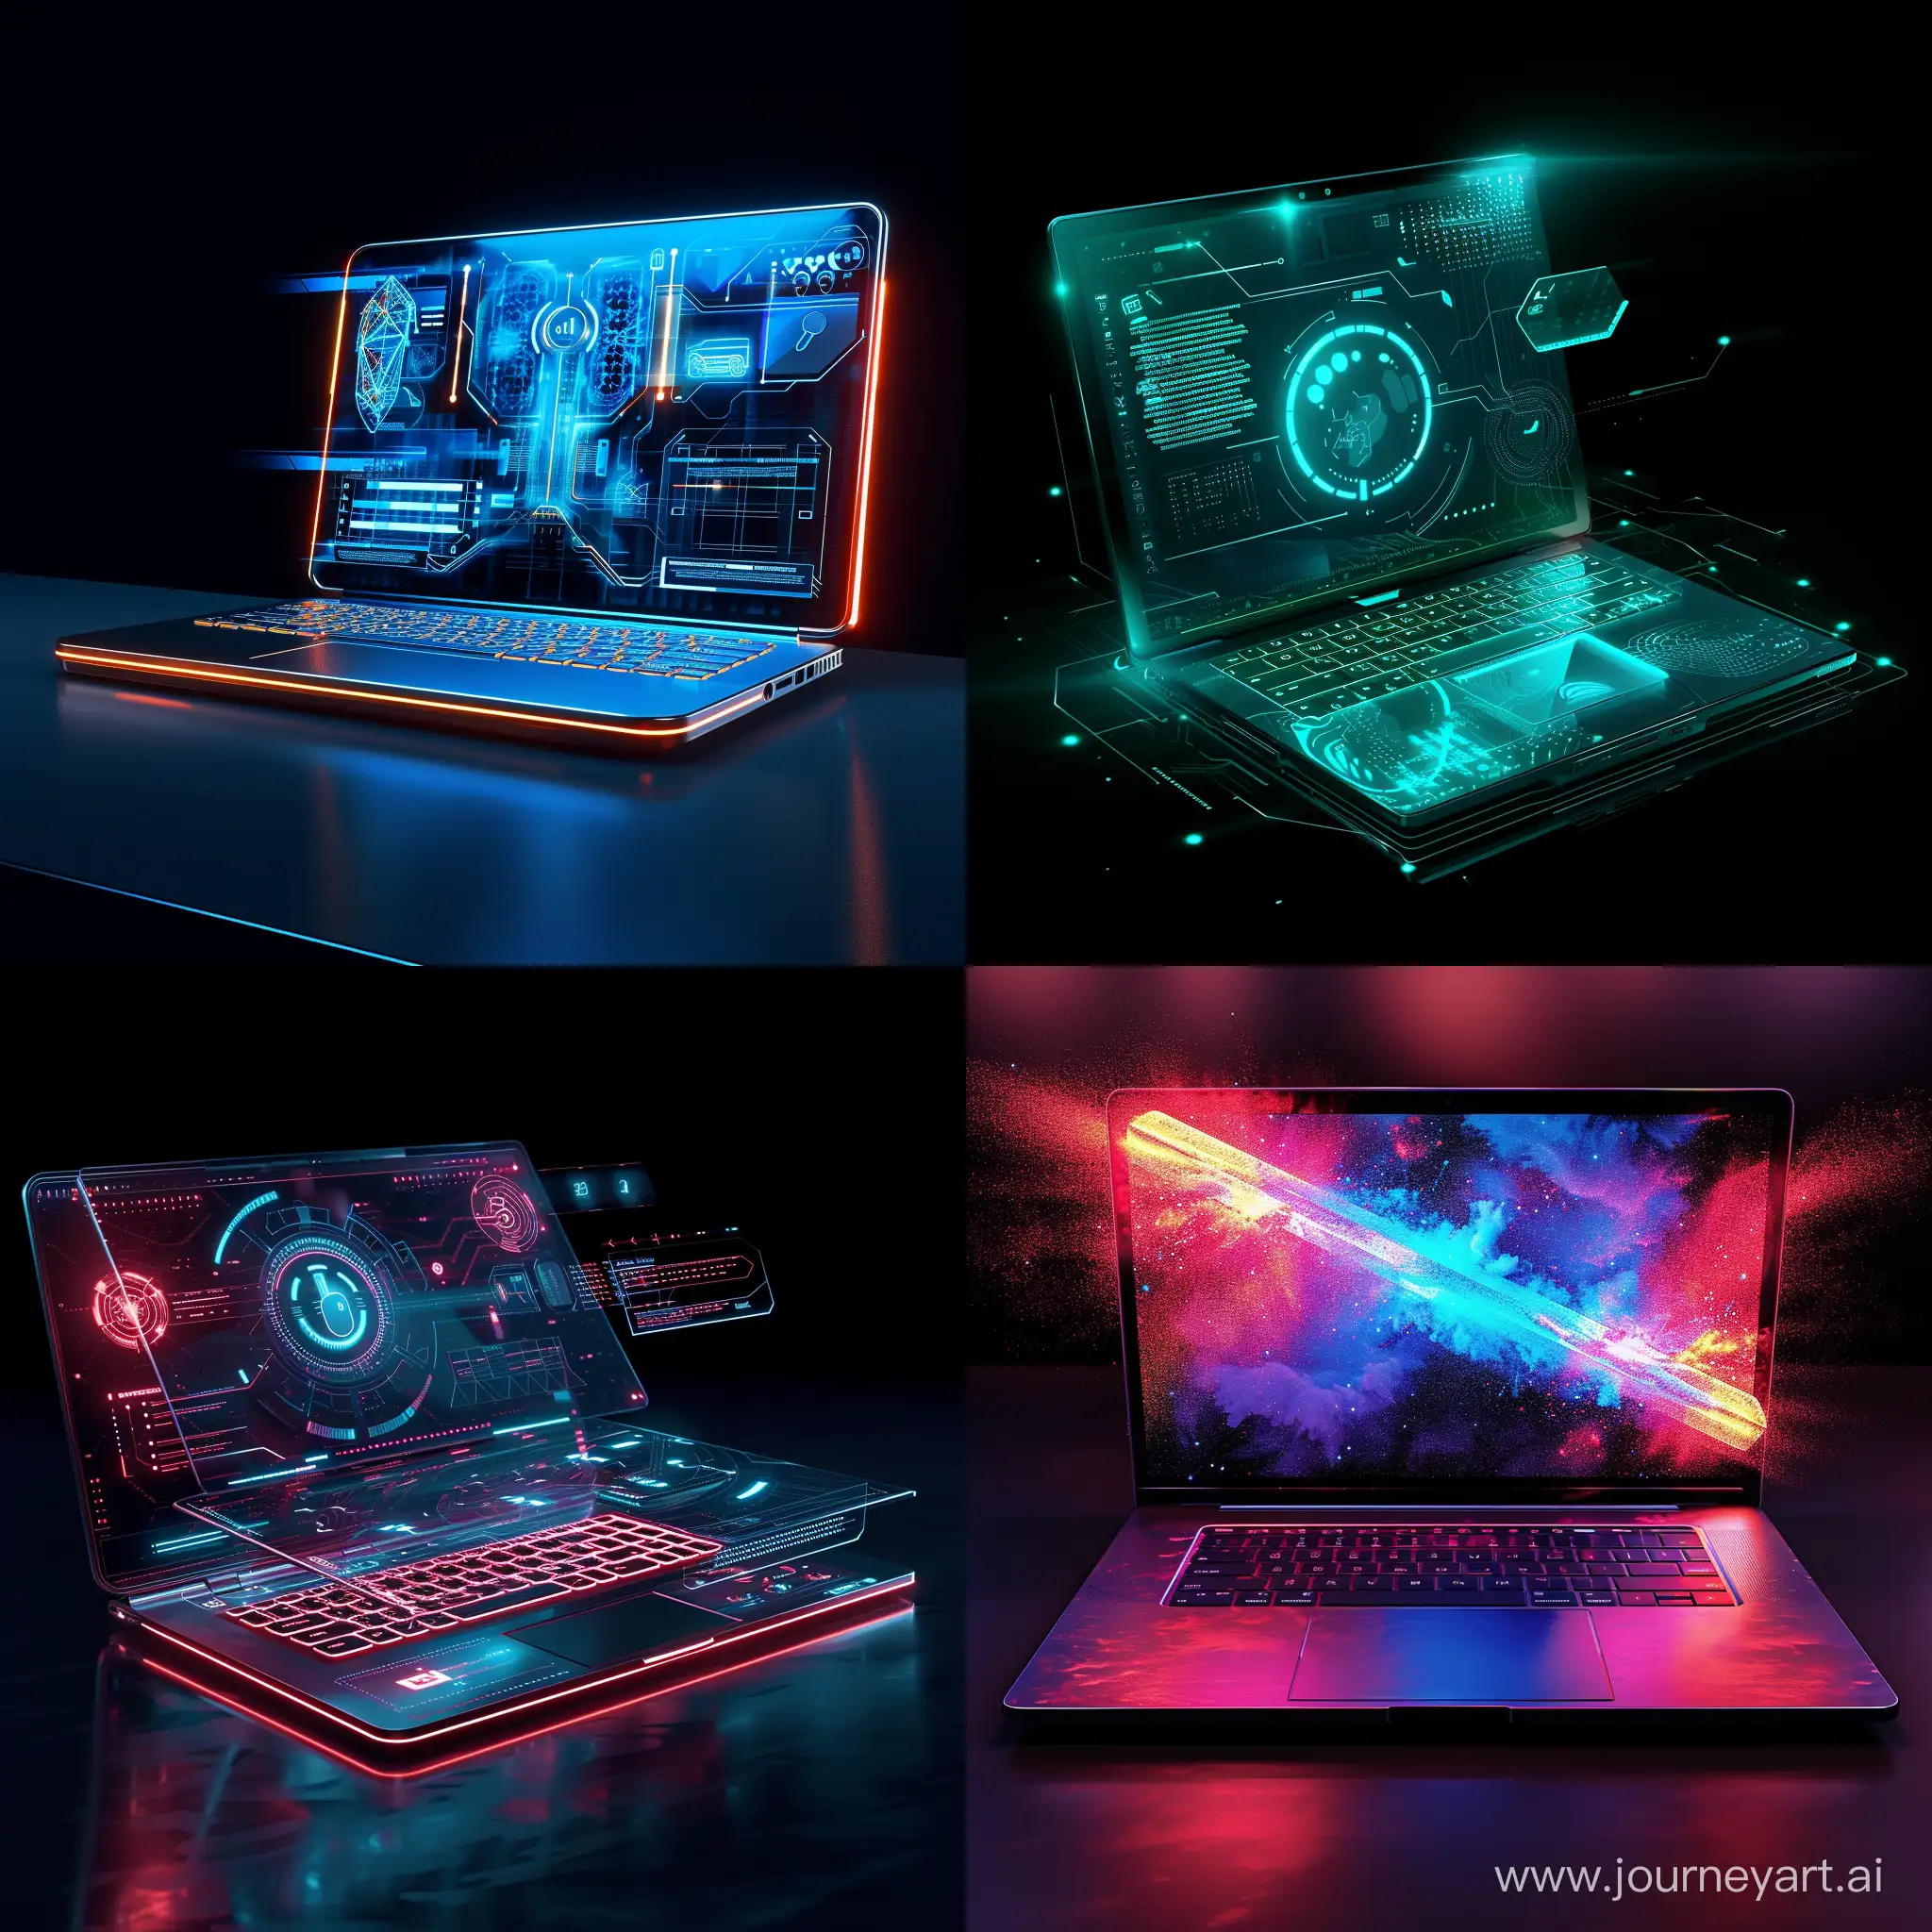 CuttingEdge-Futuristic-Laptop-with-AR-and-VR-Technologies-in-Cinematic-Realistic-Style